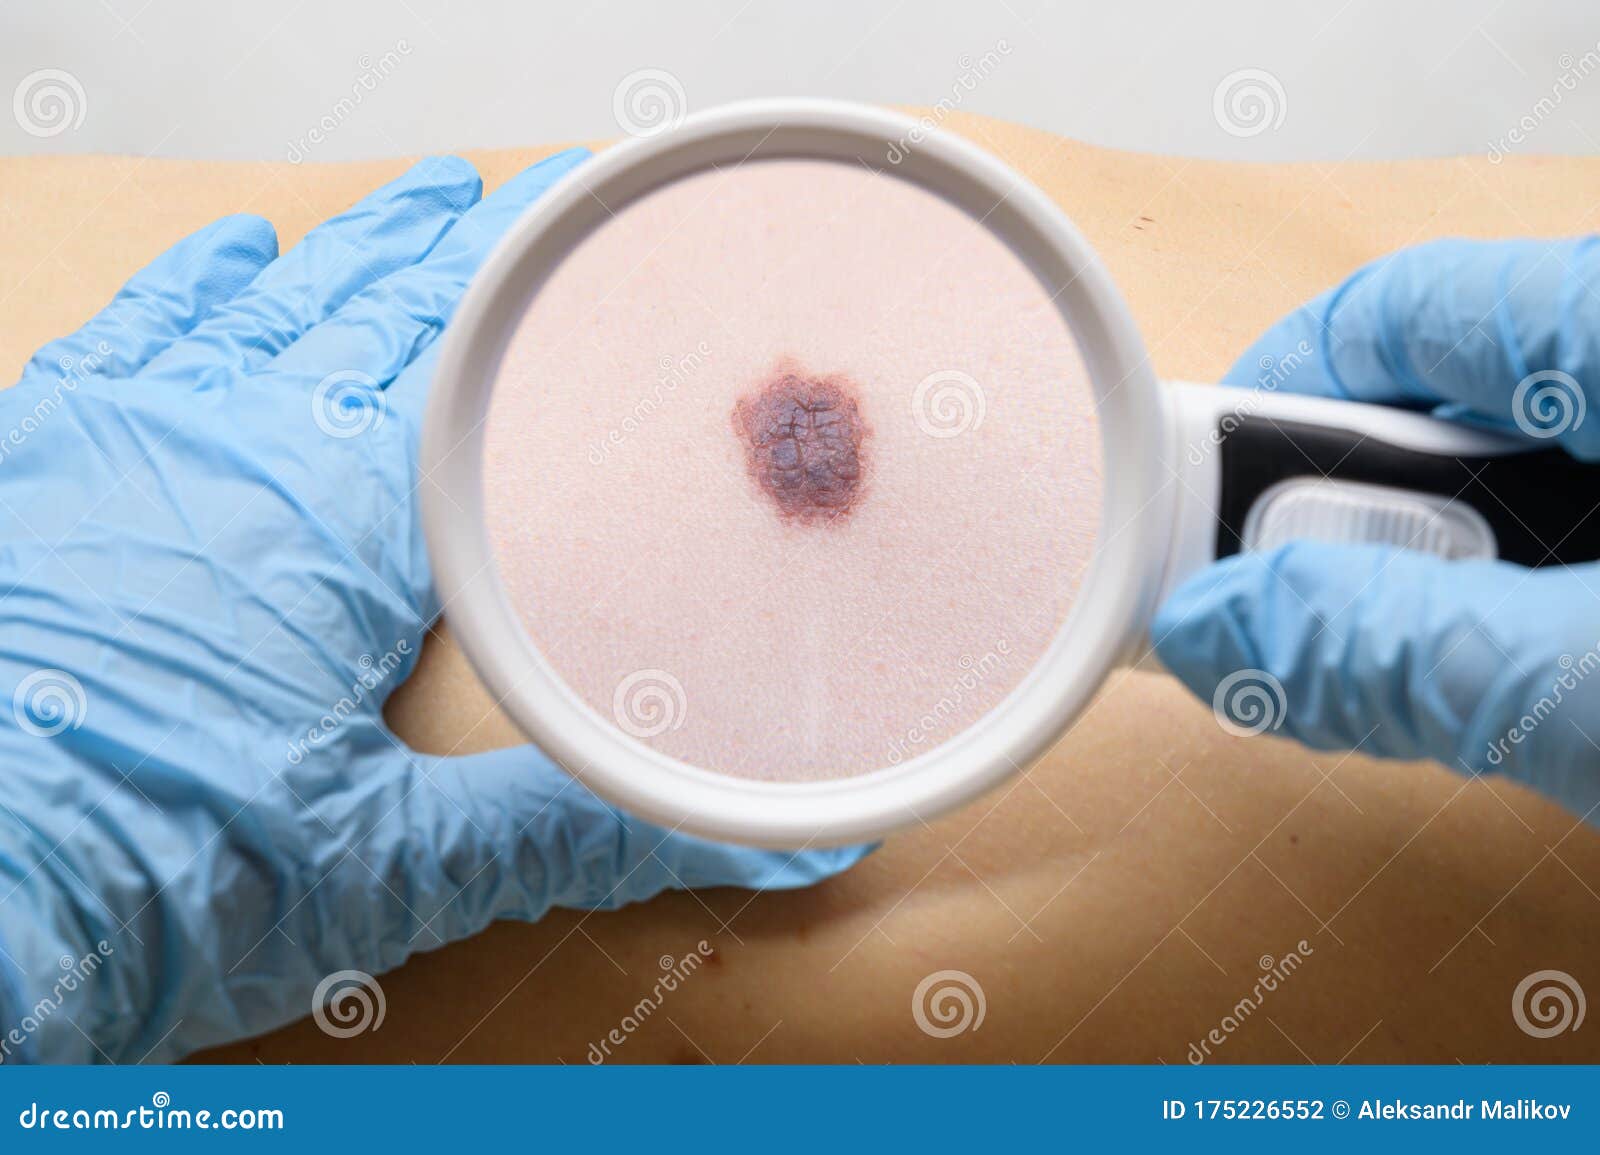 examination of a mole on the patient`s body. the concept of studying moles to prevent the development of skin cancer or melanoma